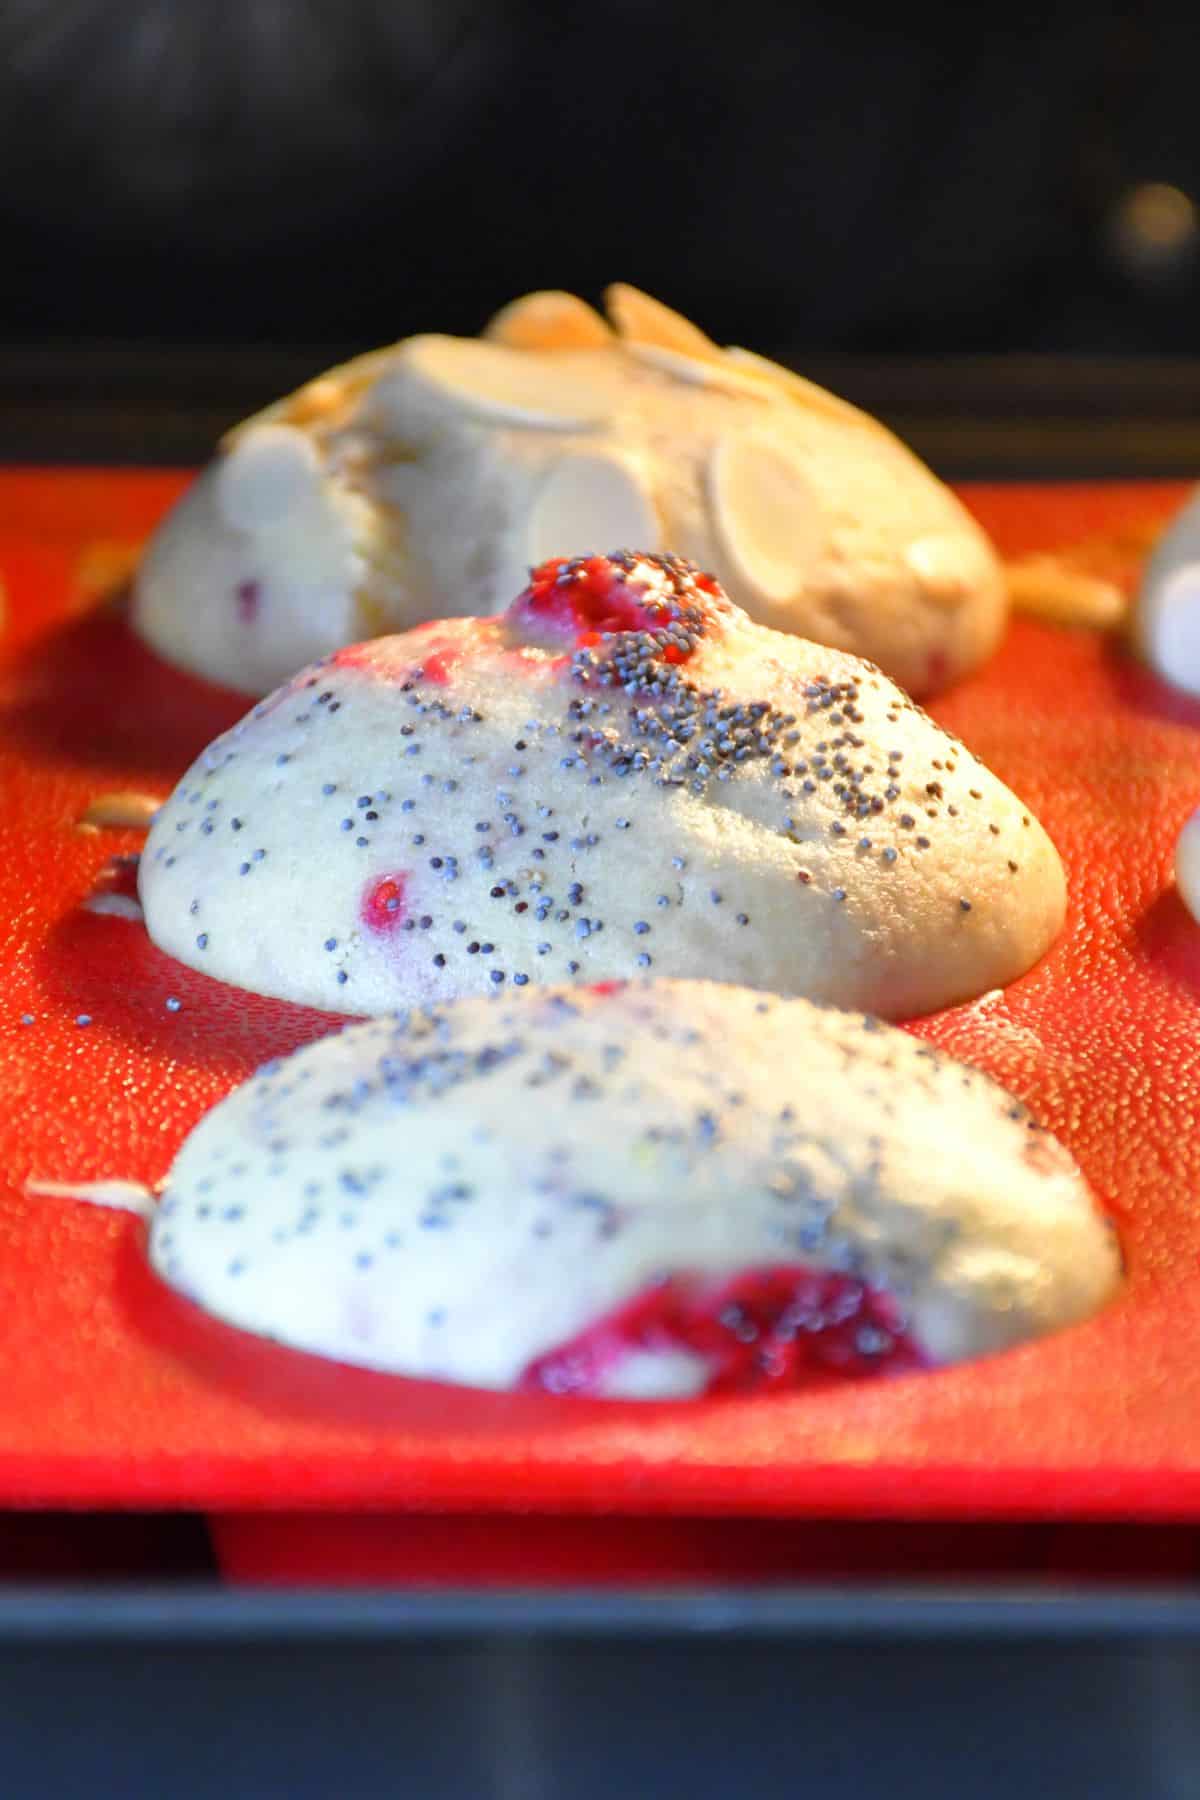 A close up on many variations of lemon raspberry muffins baking in the oven in a red silicon mold.